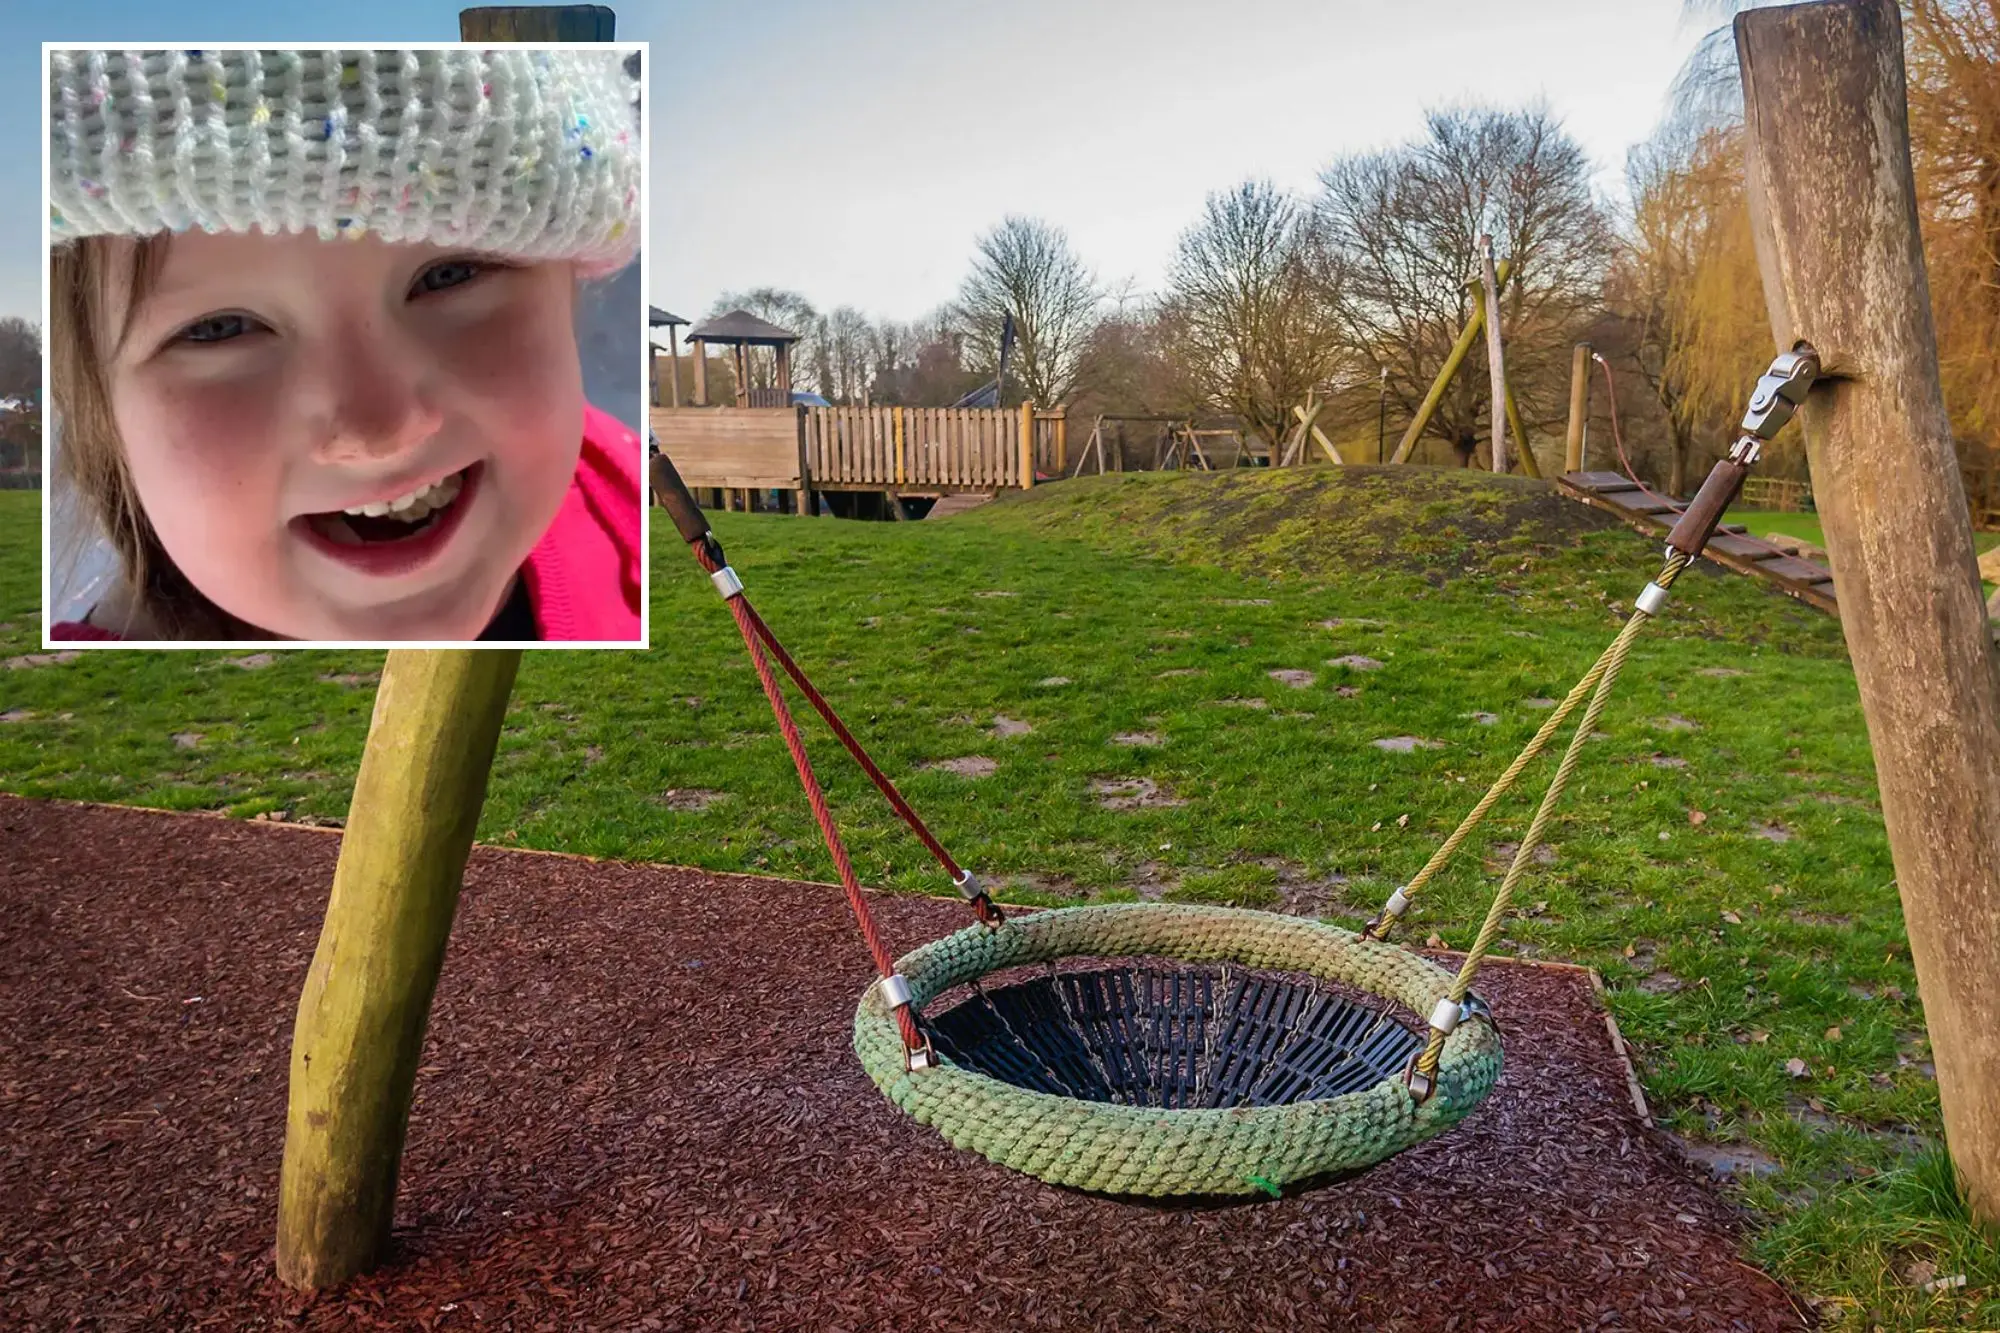 Parents Remember their Daughter After her Tragic Death on a Swing Set